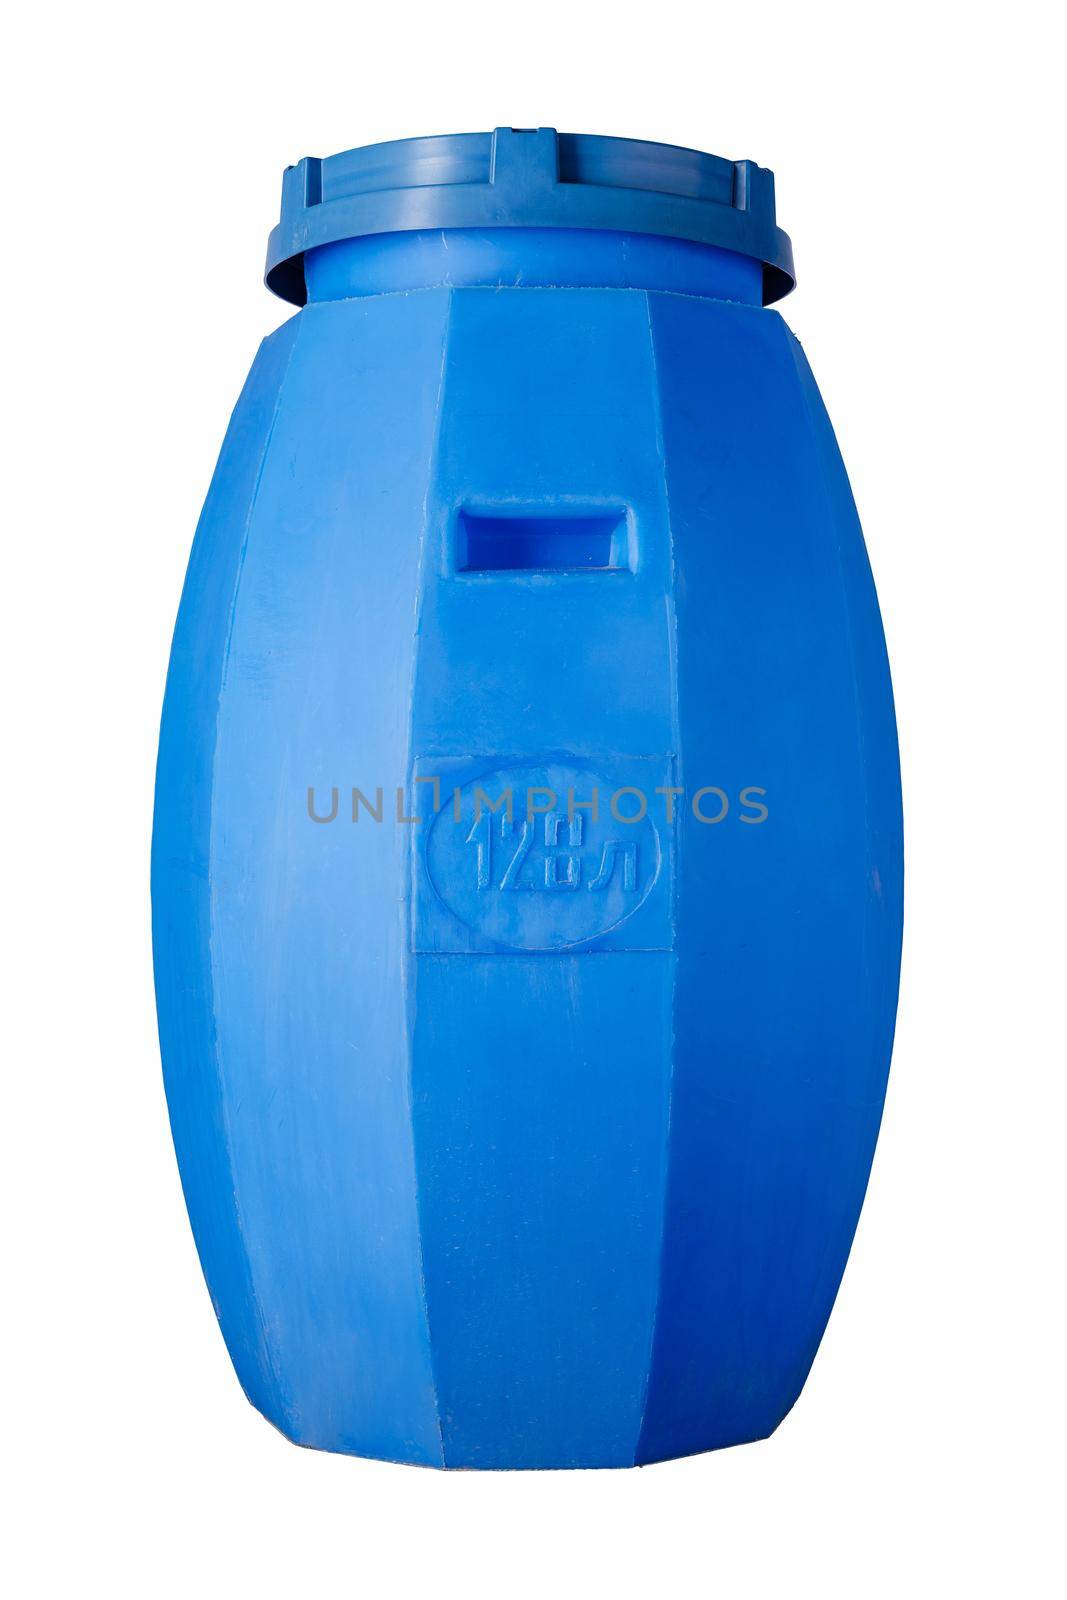 Blue plastic water tank isolated on white by Fabrikasimf